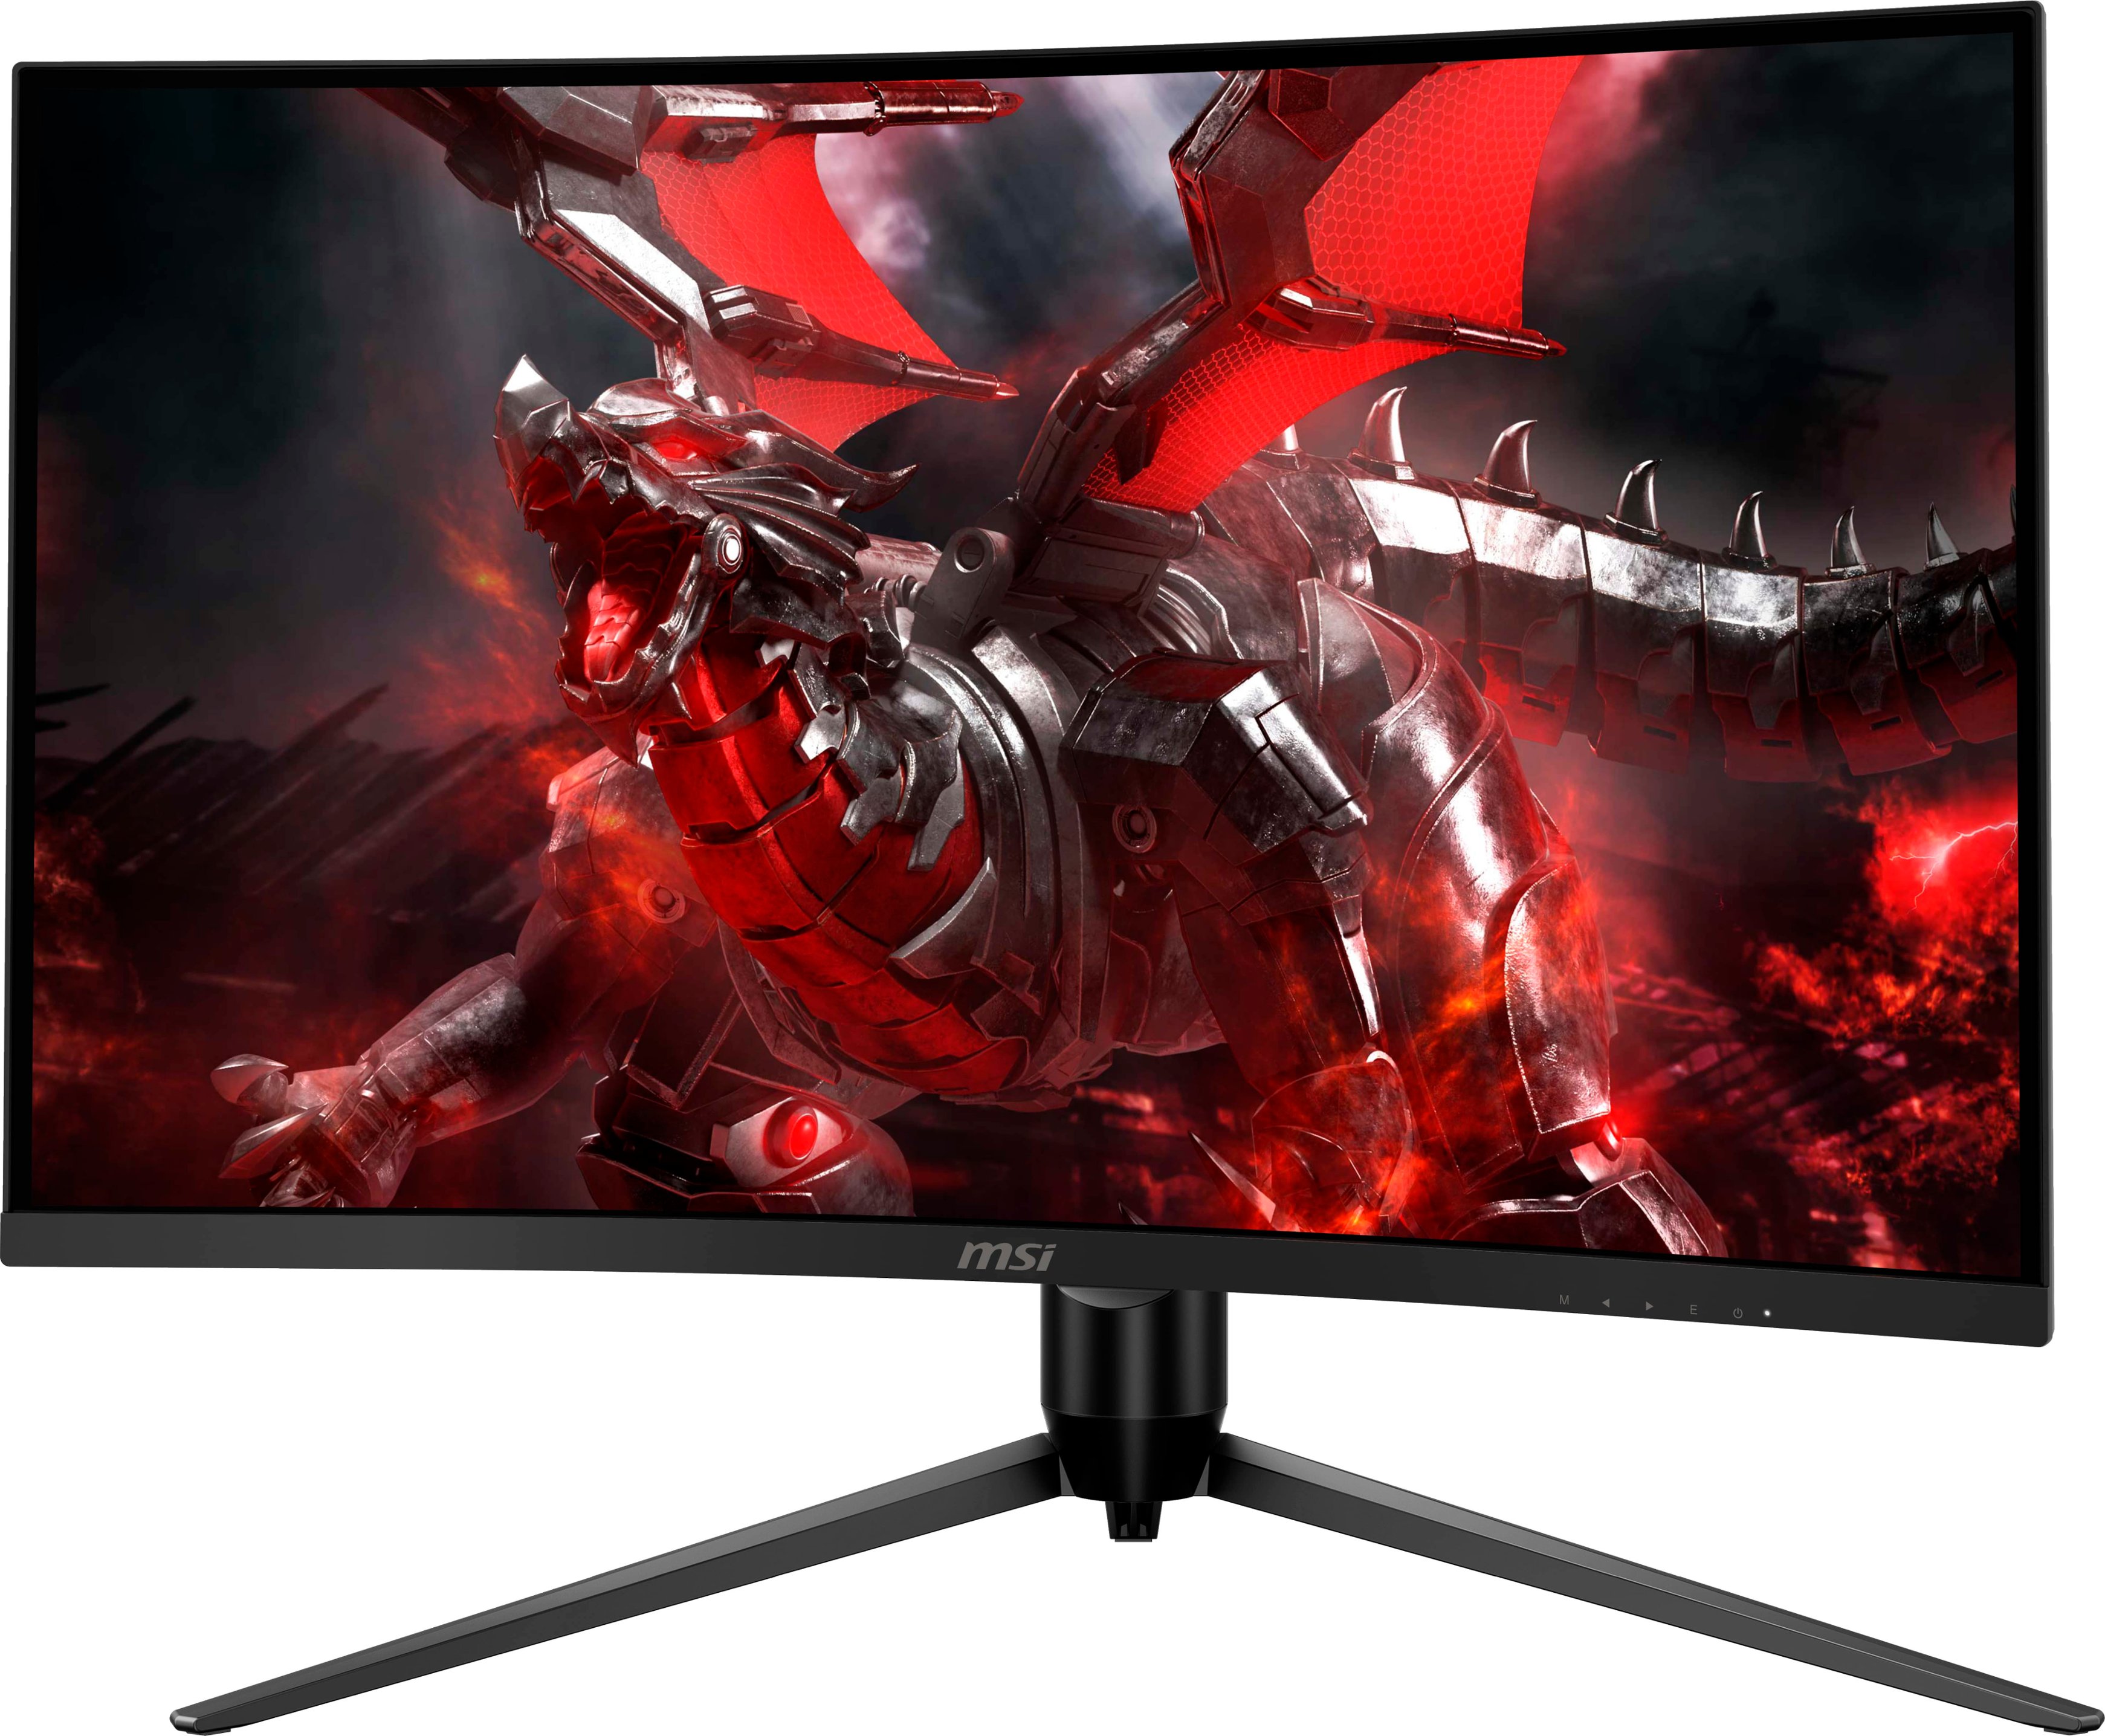 Left View: MSI - Optix 27" LED Curved FHD FreeSync Monitor with Height, Tilt, Swivel (DisplayPort, HDMI) - Black